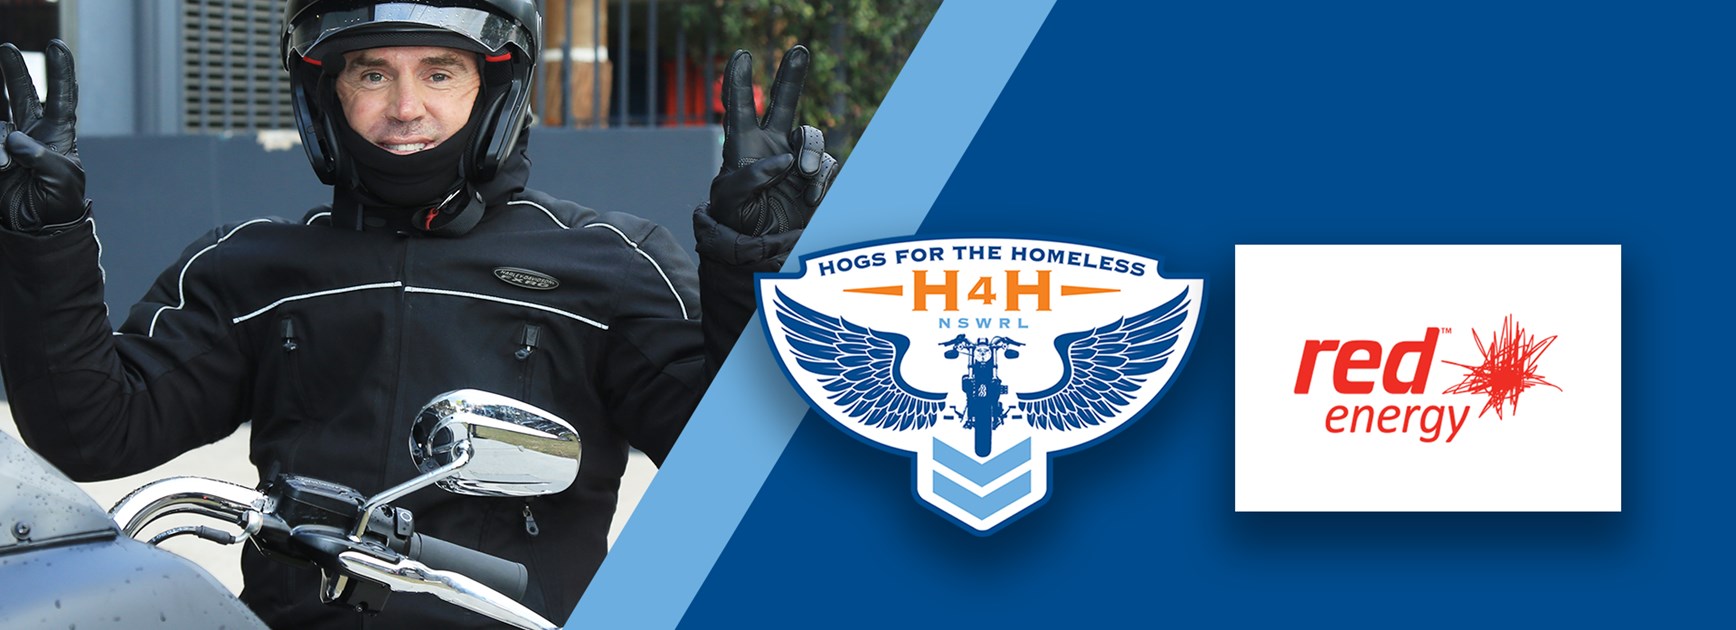 Red Energy joins 2019 Hogs For The Homeless tour